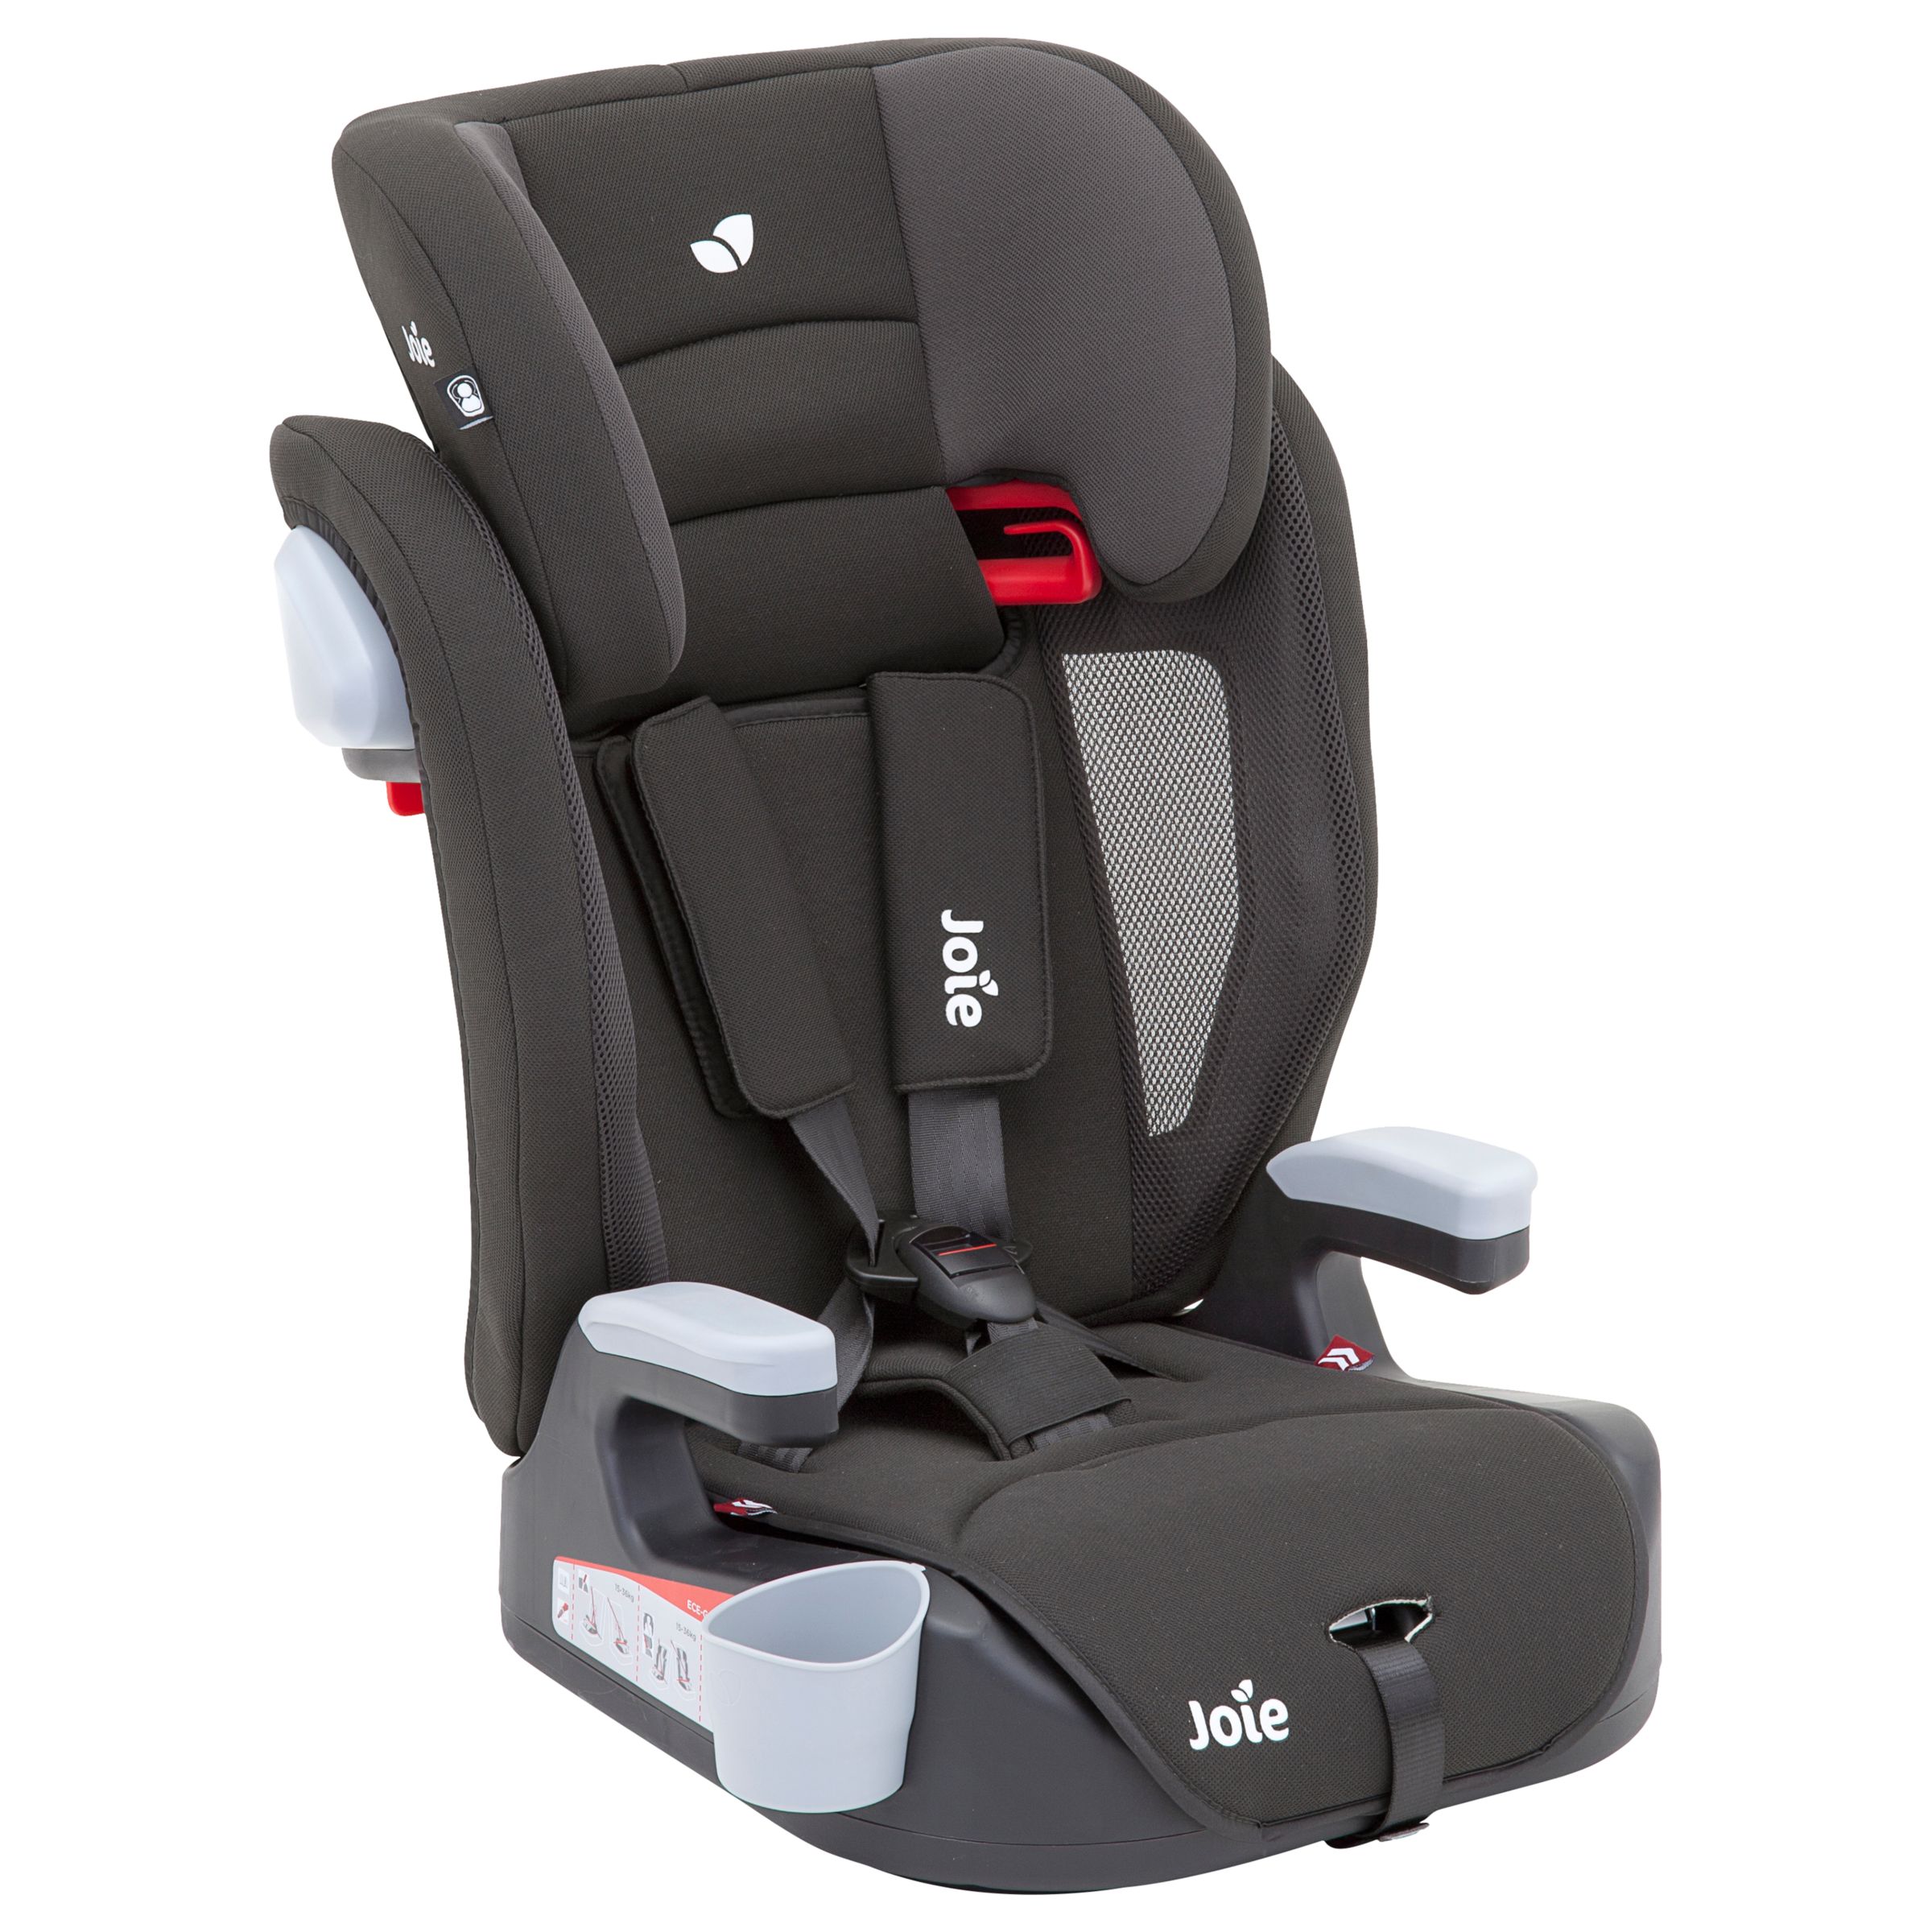 Joie Baby Elevate Group 1 2 3 Car Seat, Which Group 1 Car Seat